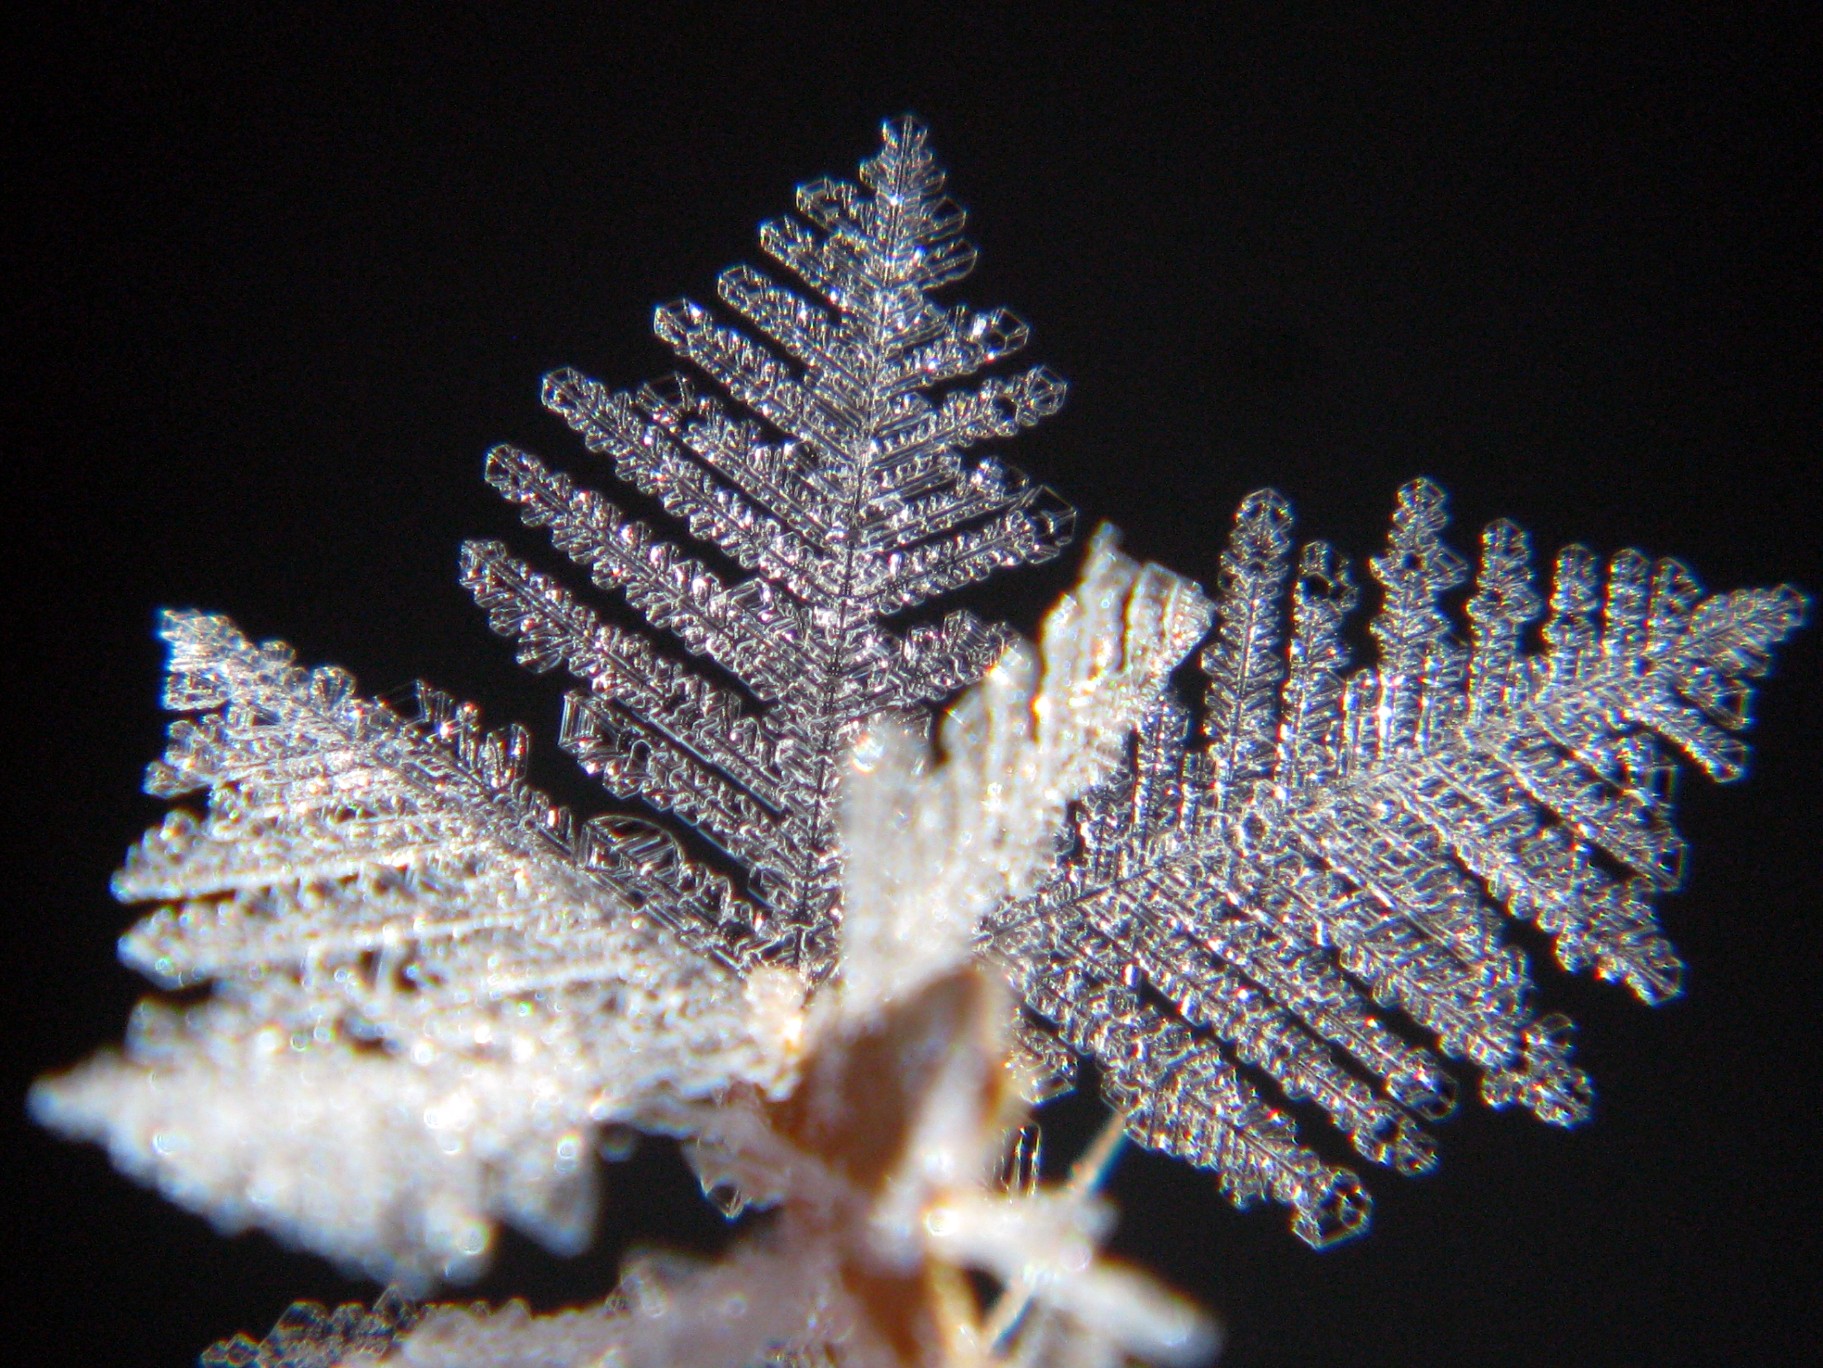 an odd looking snowflake with an odd light reflecting on the leaf